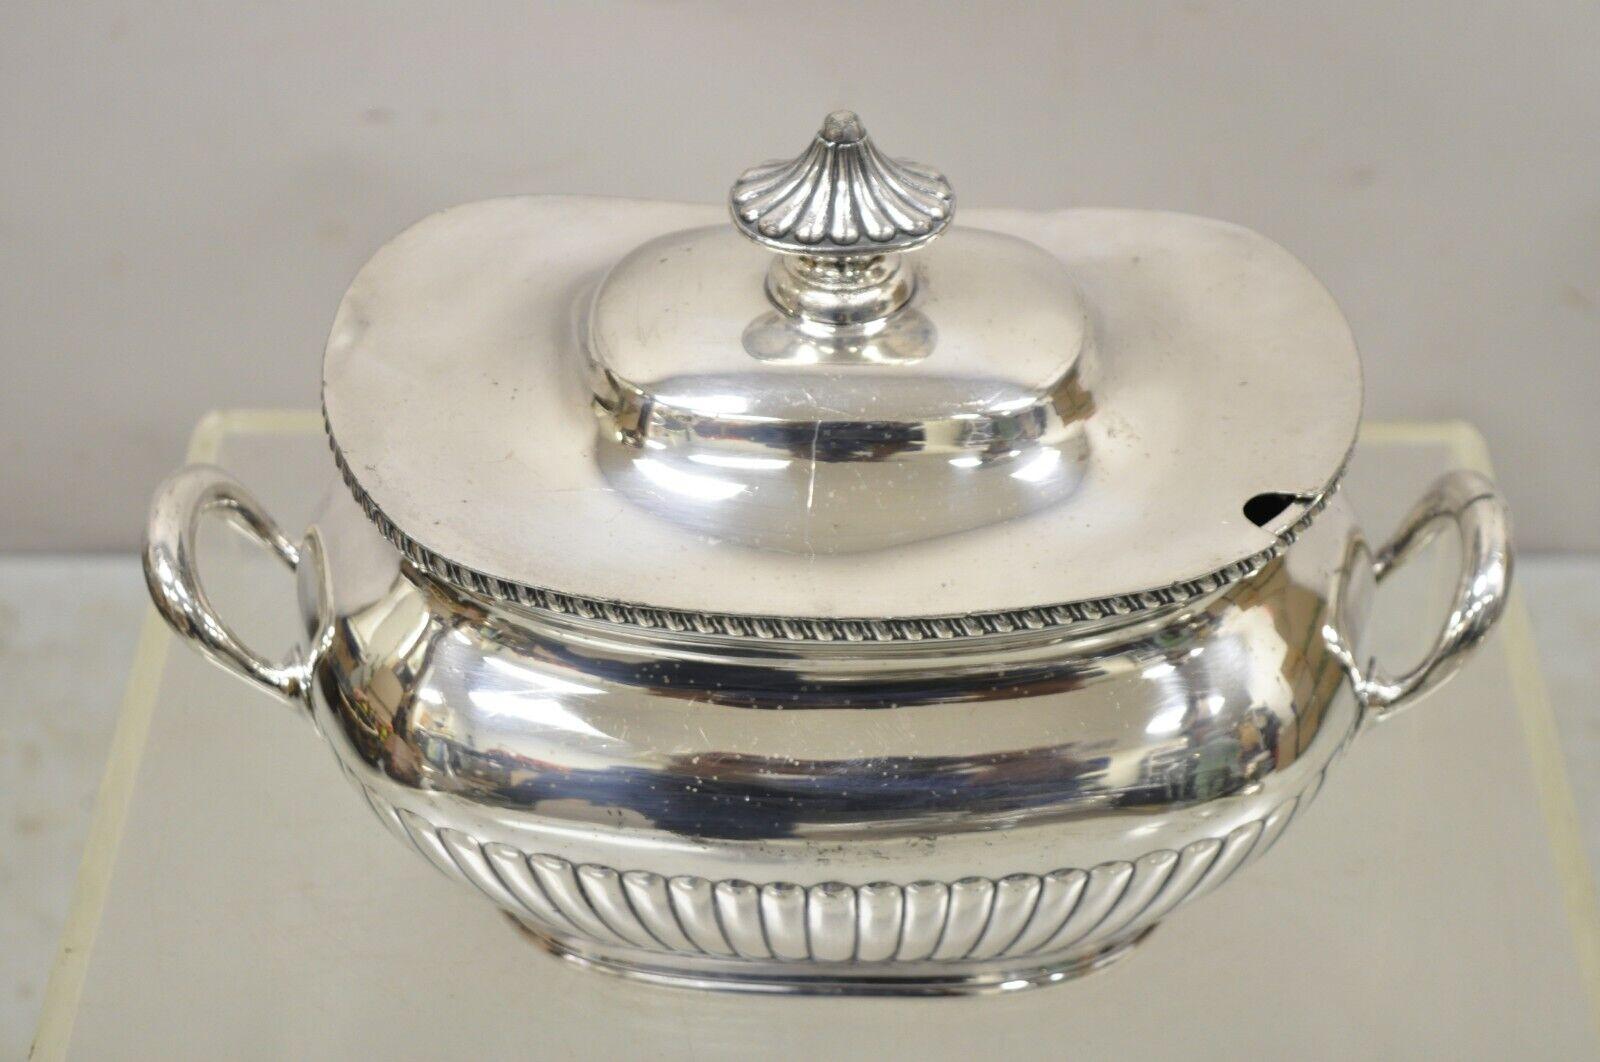 Antique Reed & Barton Victorian Silver Plated Soup Tureen with Lid. Item features an ornate finial and twin handles, original hallmark, very nice vintage item, great style and form. Circa Early 1900s. Measurements: 9